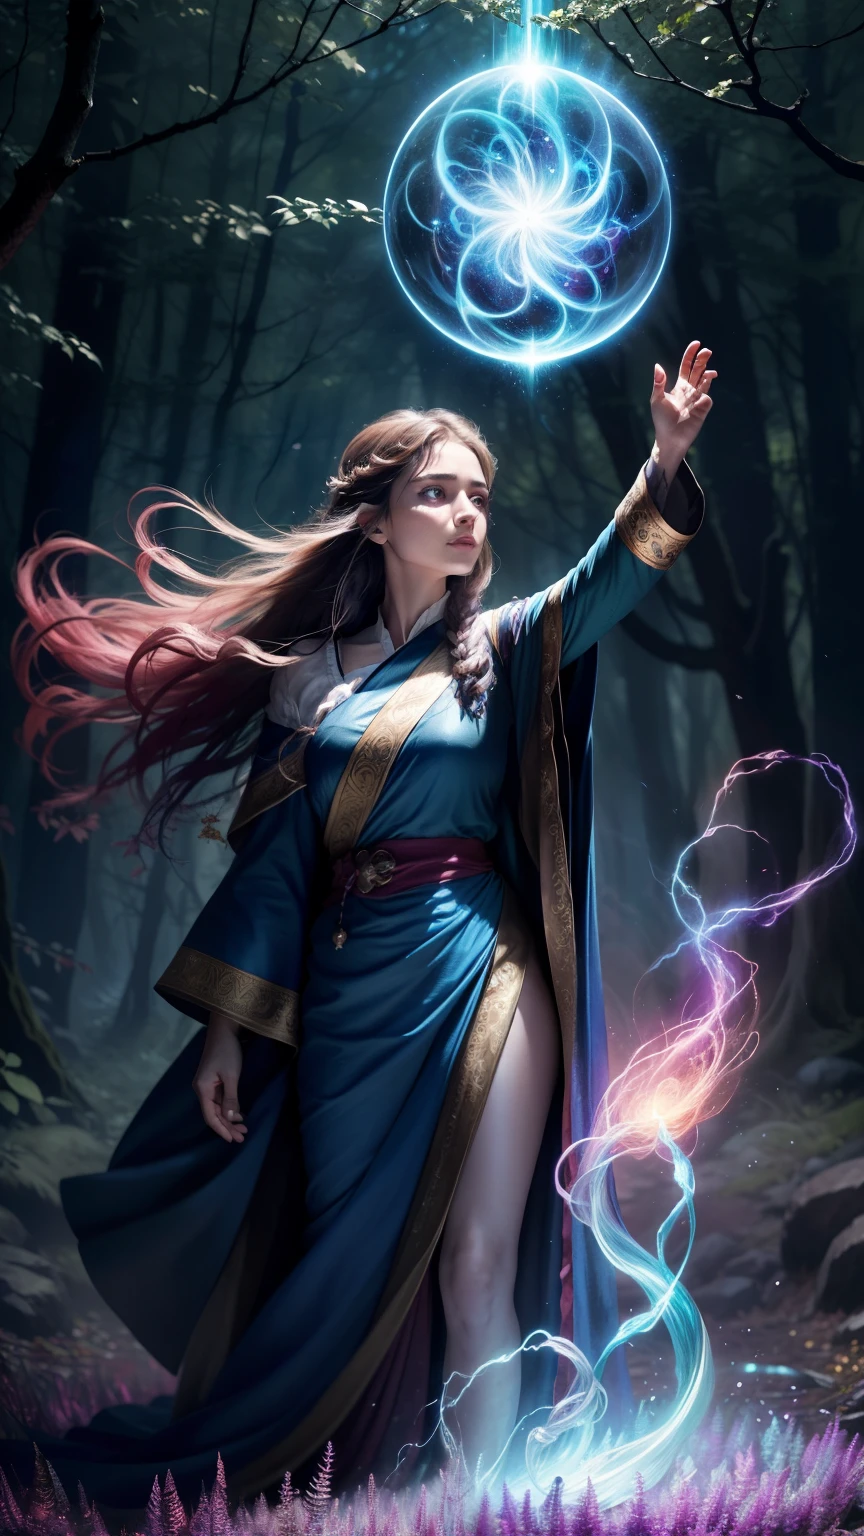 A powerful wizard, standing in a mystical forest. Their flowing robes adorned with symbols, arms outstretched, eyes sparkling with arcane energy. As their incantation escapes their lips, vibrant, swirling patterns of dark magic manifest in the air, pulsating with hues of reds and blues. Enchantment permeates, causing flowers to bloom, creatures to gaze in awe. Wisps of magic energy dance, revealing hidden realms, unlocking secrets. Capture the essence of this spellbinding moment, bringing the mystic power of the dark enchantment to life on the canvas with the highest quality and detail. Best quality, masterpiece, ultra high res, (photorealistic:1.4), raw photo, sharp focus, HDR, detailed skin.